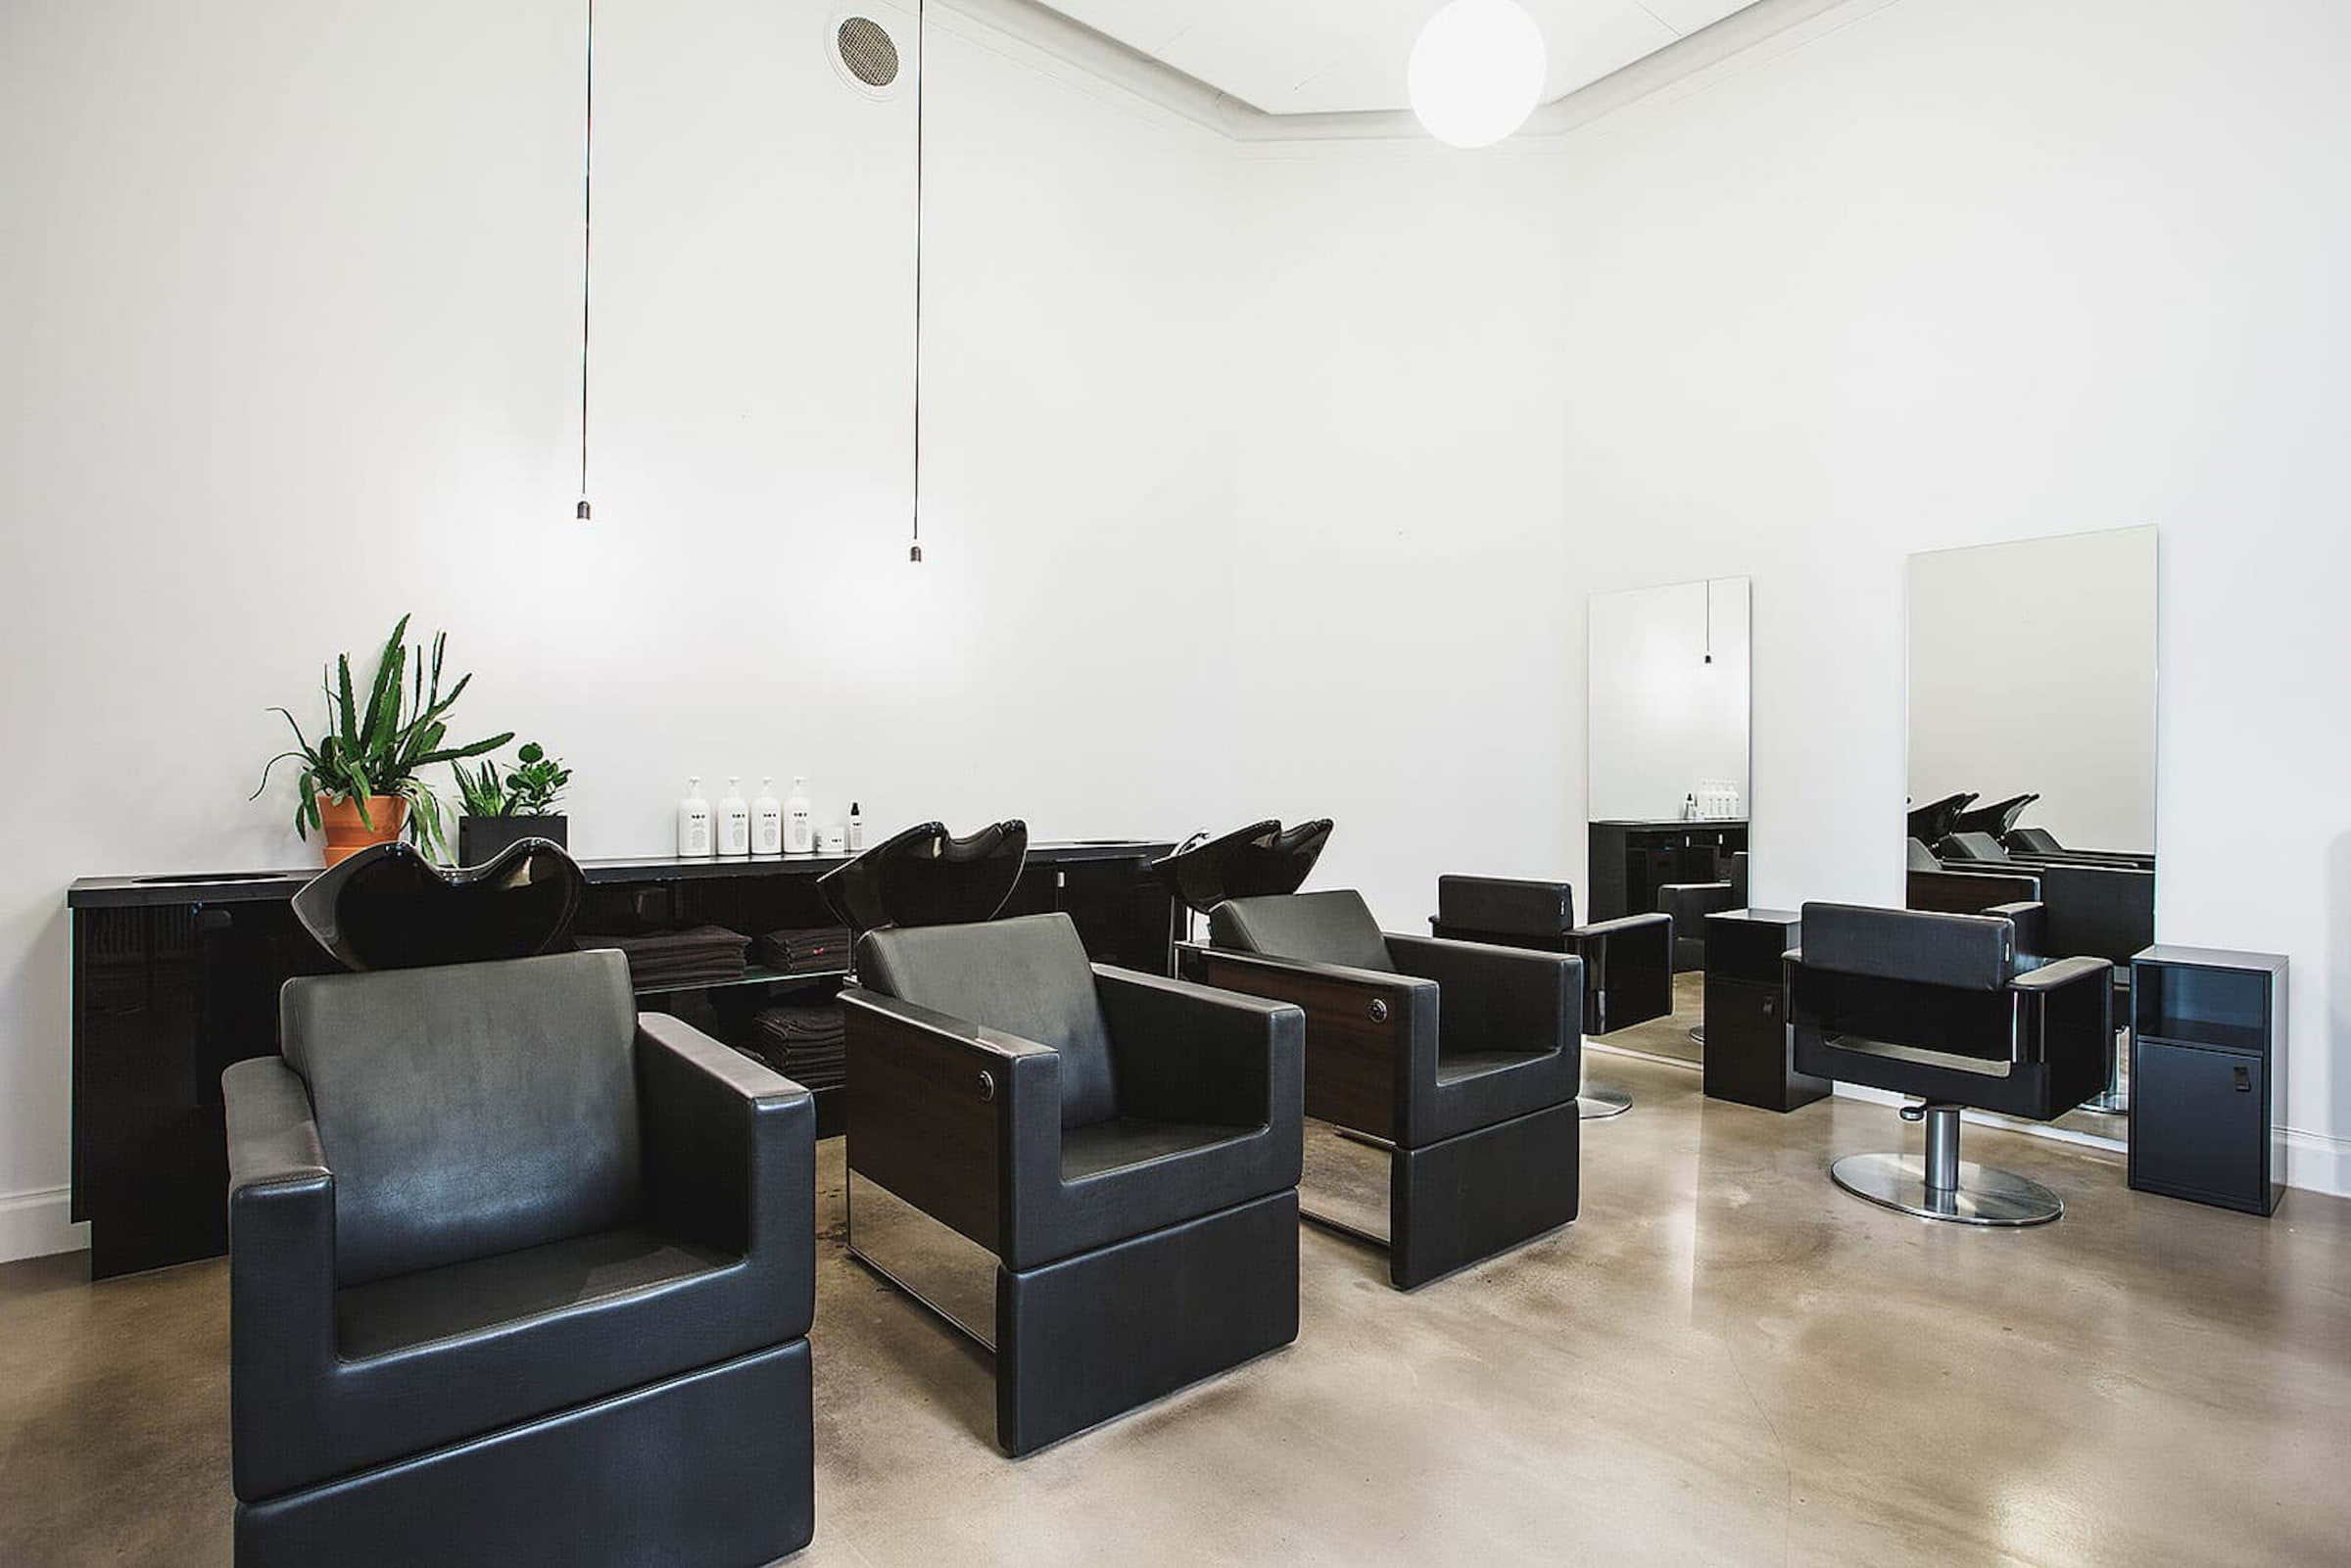 The best places to get hair extensions in London